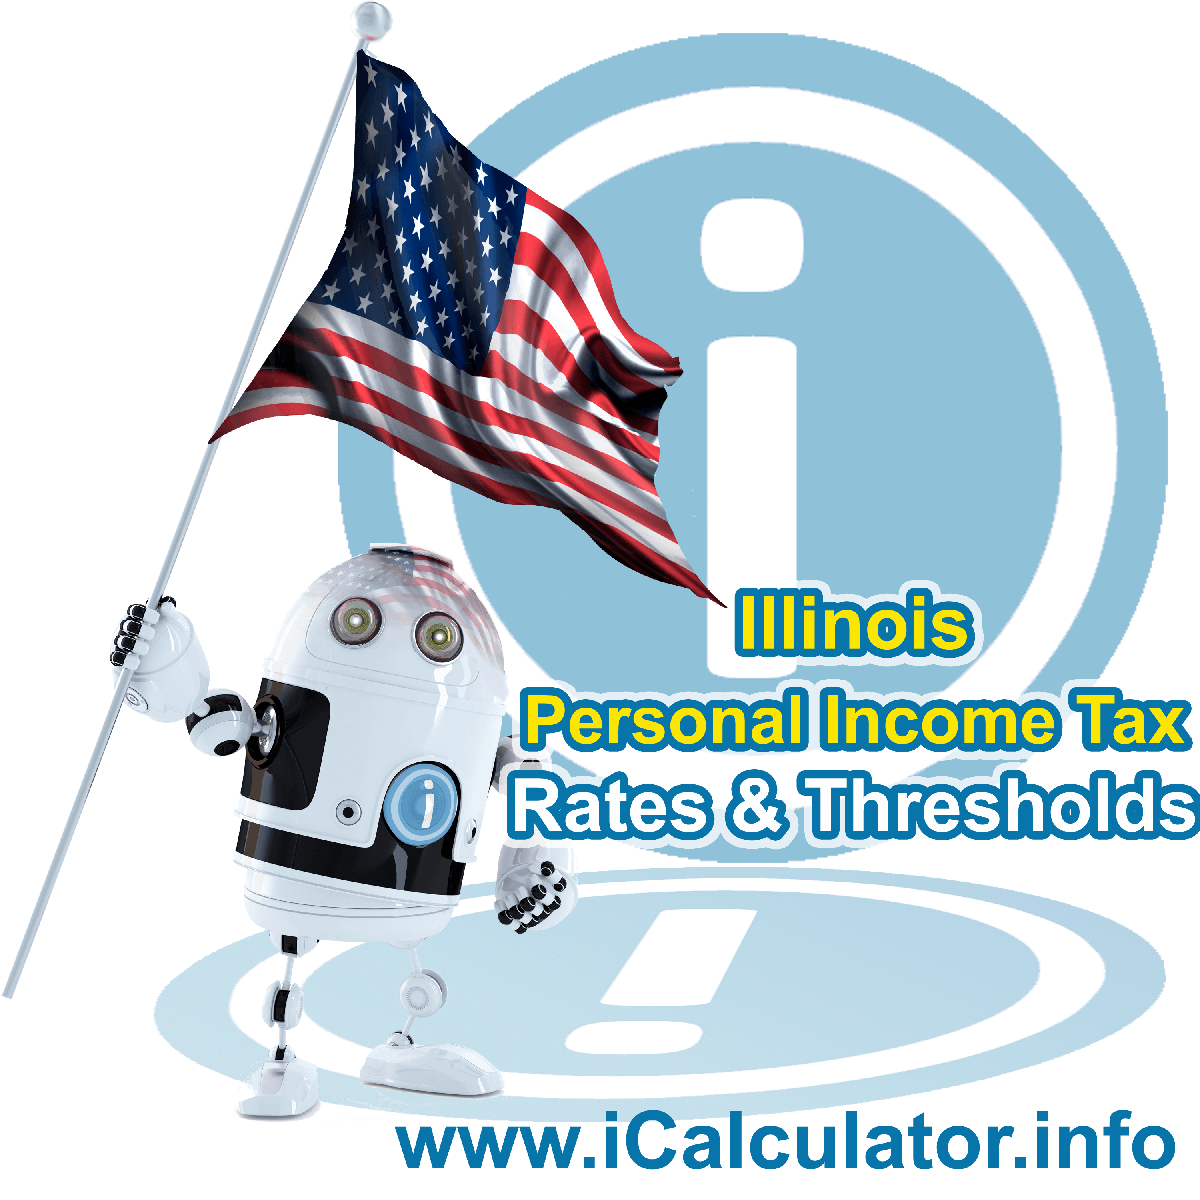 Illinois State Tax Tables 2017. This image displays details of the Illinois State Tax Tables for the 2017 tax return year which is provided in support of the 2017 US Tax Calculator